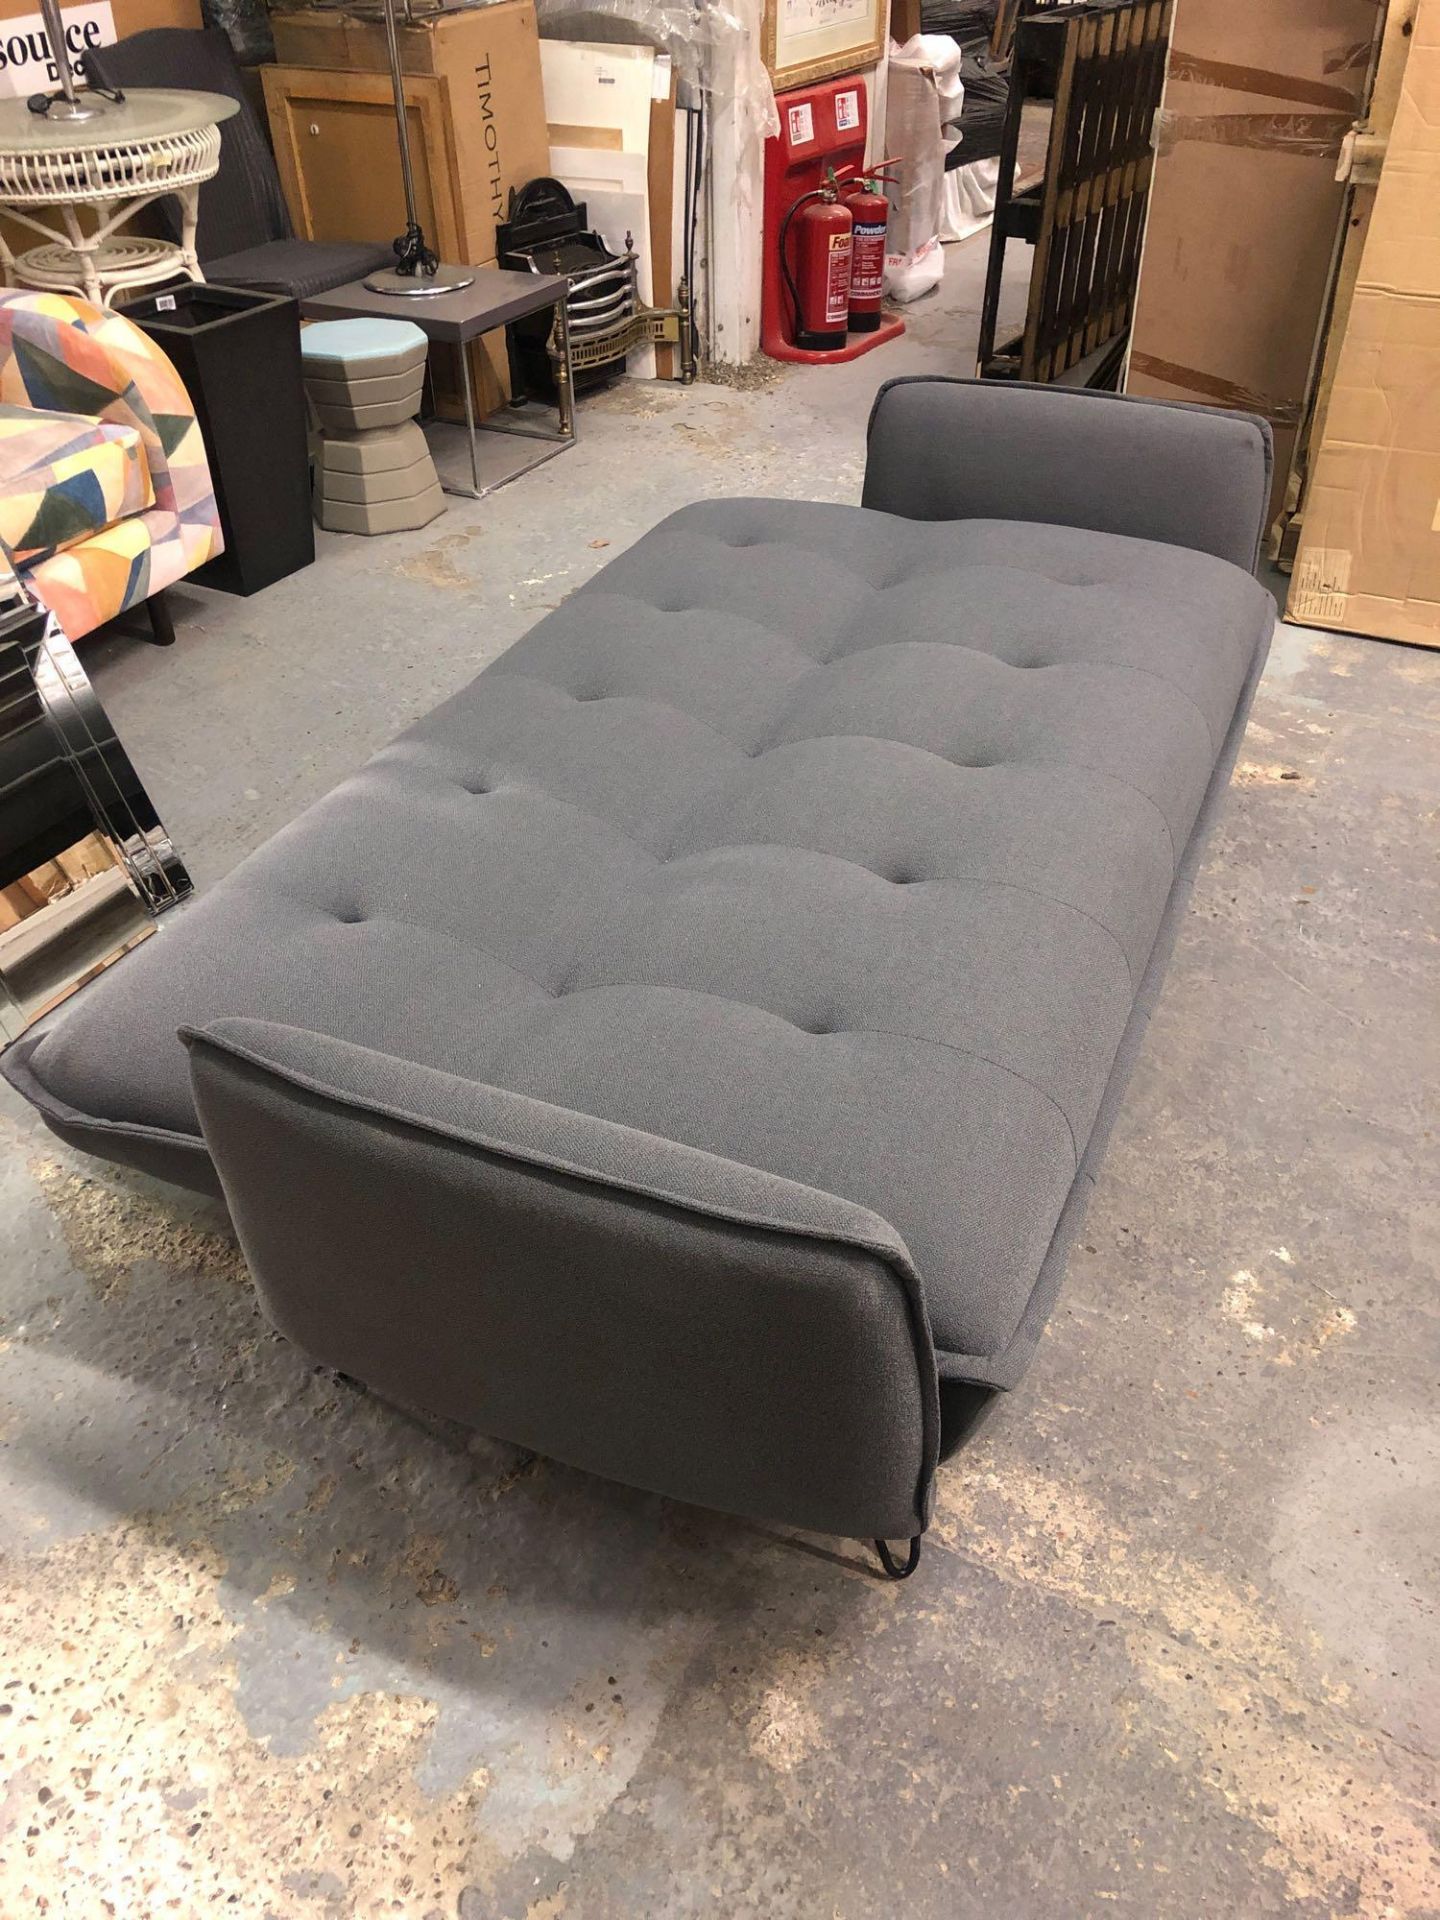 Mora Sofabed Slate W2110 x D860 x H840mm - Image 2 of 3